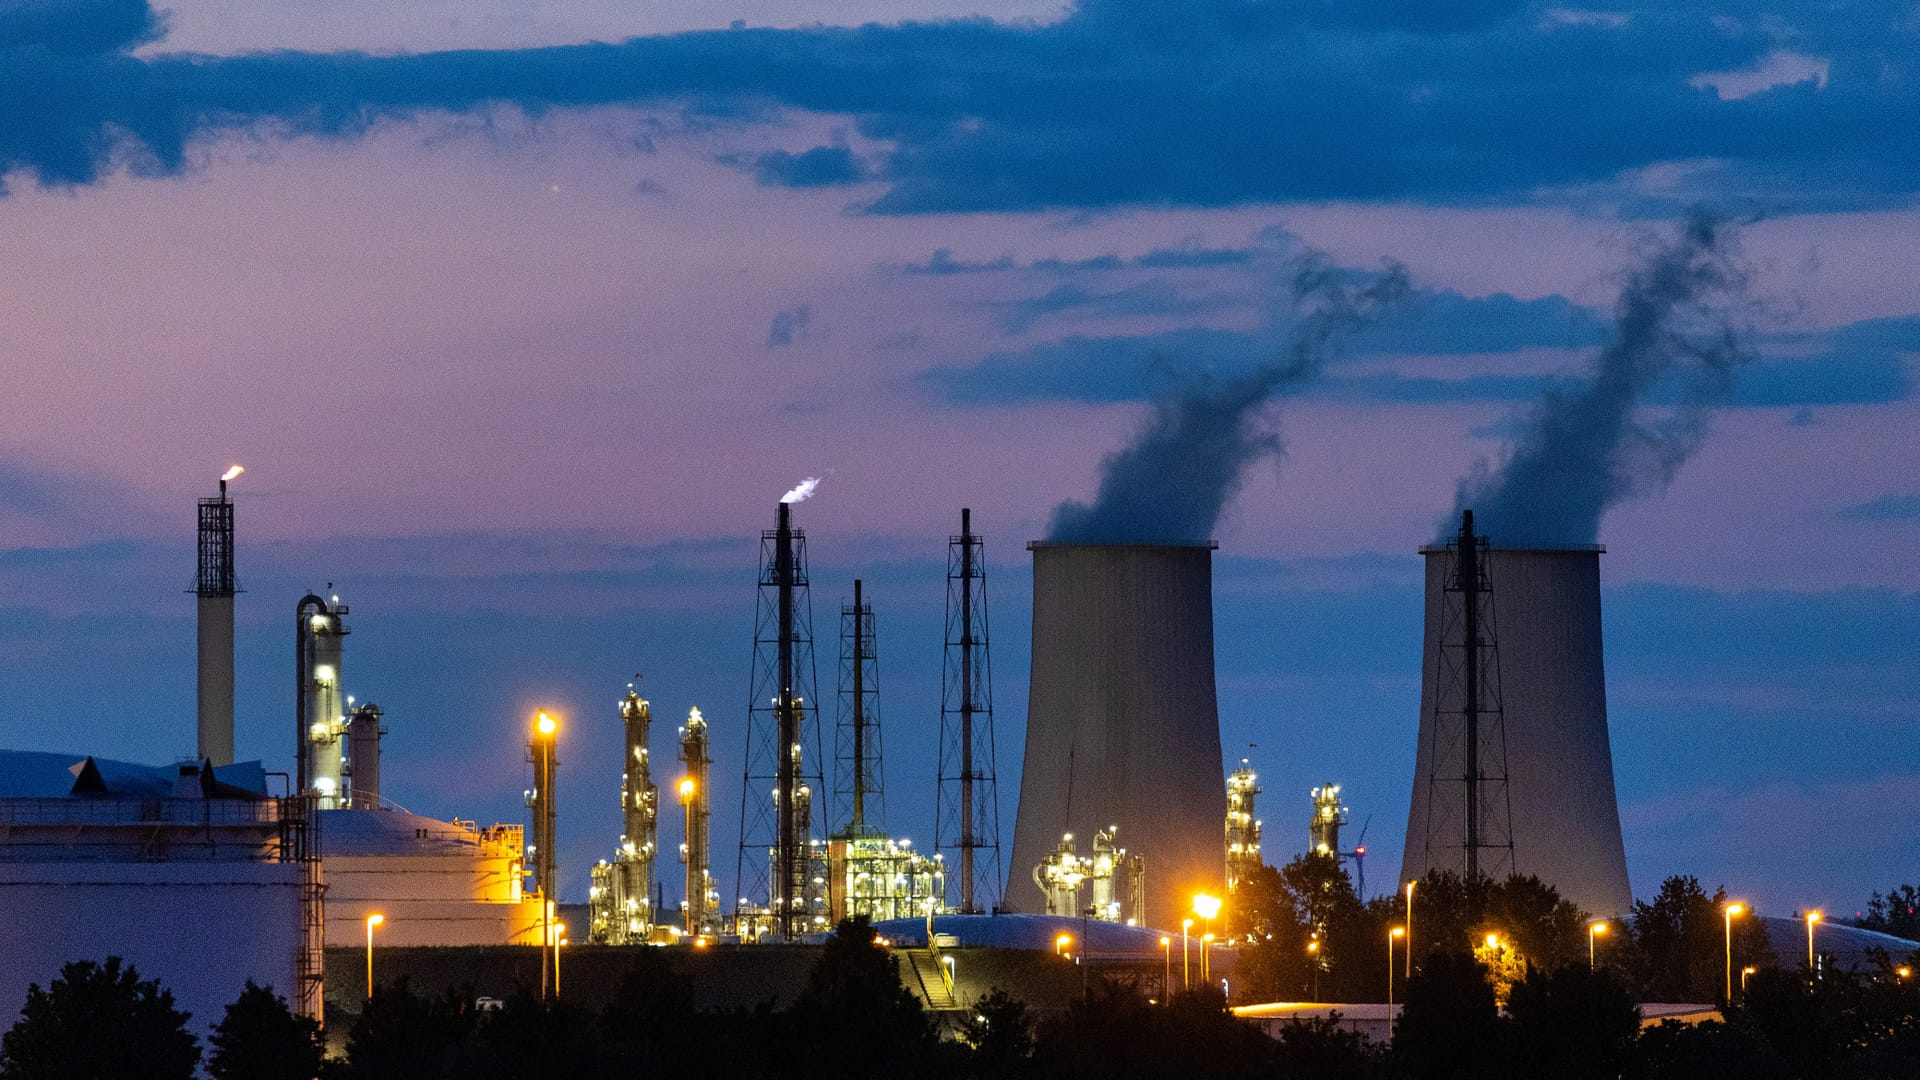 Cooling towers emiting vapor at the Leuna refinery and chemical industrial complex, home to refineries and plants operated by TotalEnergies in Leuna, Germany, on Tuesday, June 7, 2022.